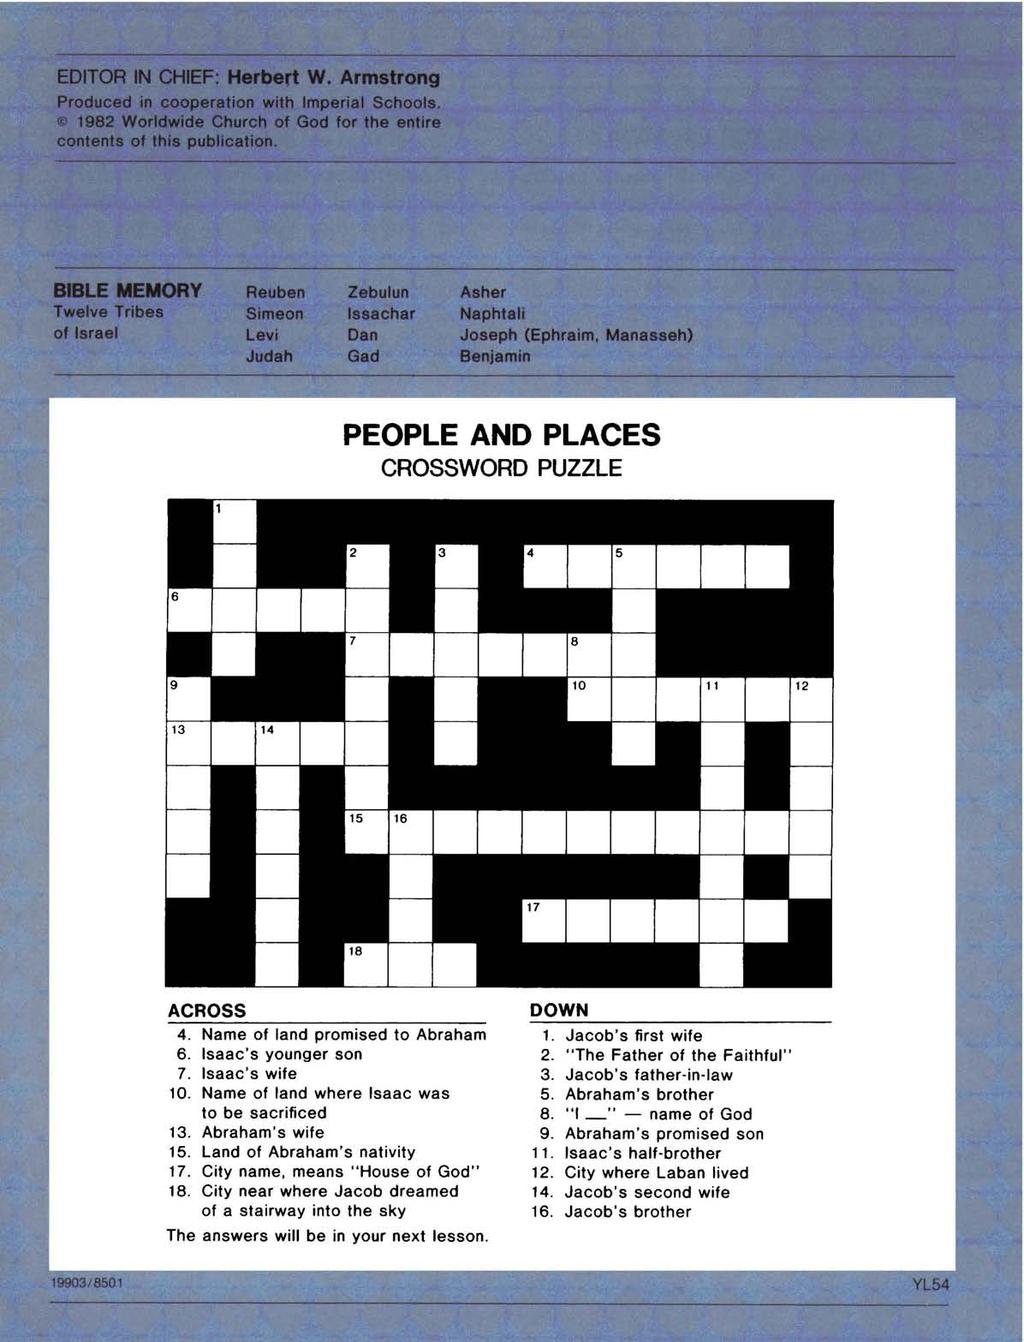 PEOPLE AND PLACES CROSSWORD PUZZLE ACROSS 4. Name of land promised to Abraham 6. Isaac's younger son 7. Isaac's wife 10. Name of land where Isaac was to be sacrificed 13. Abraham's wife 15.